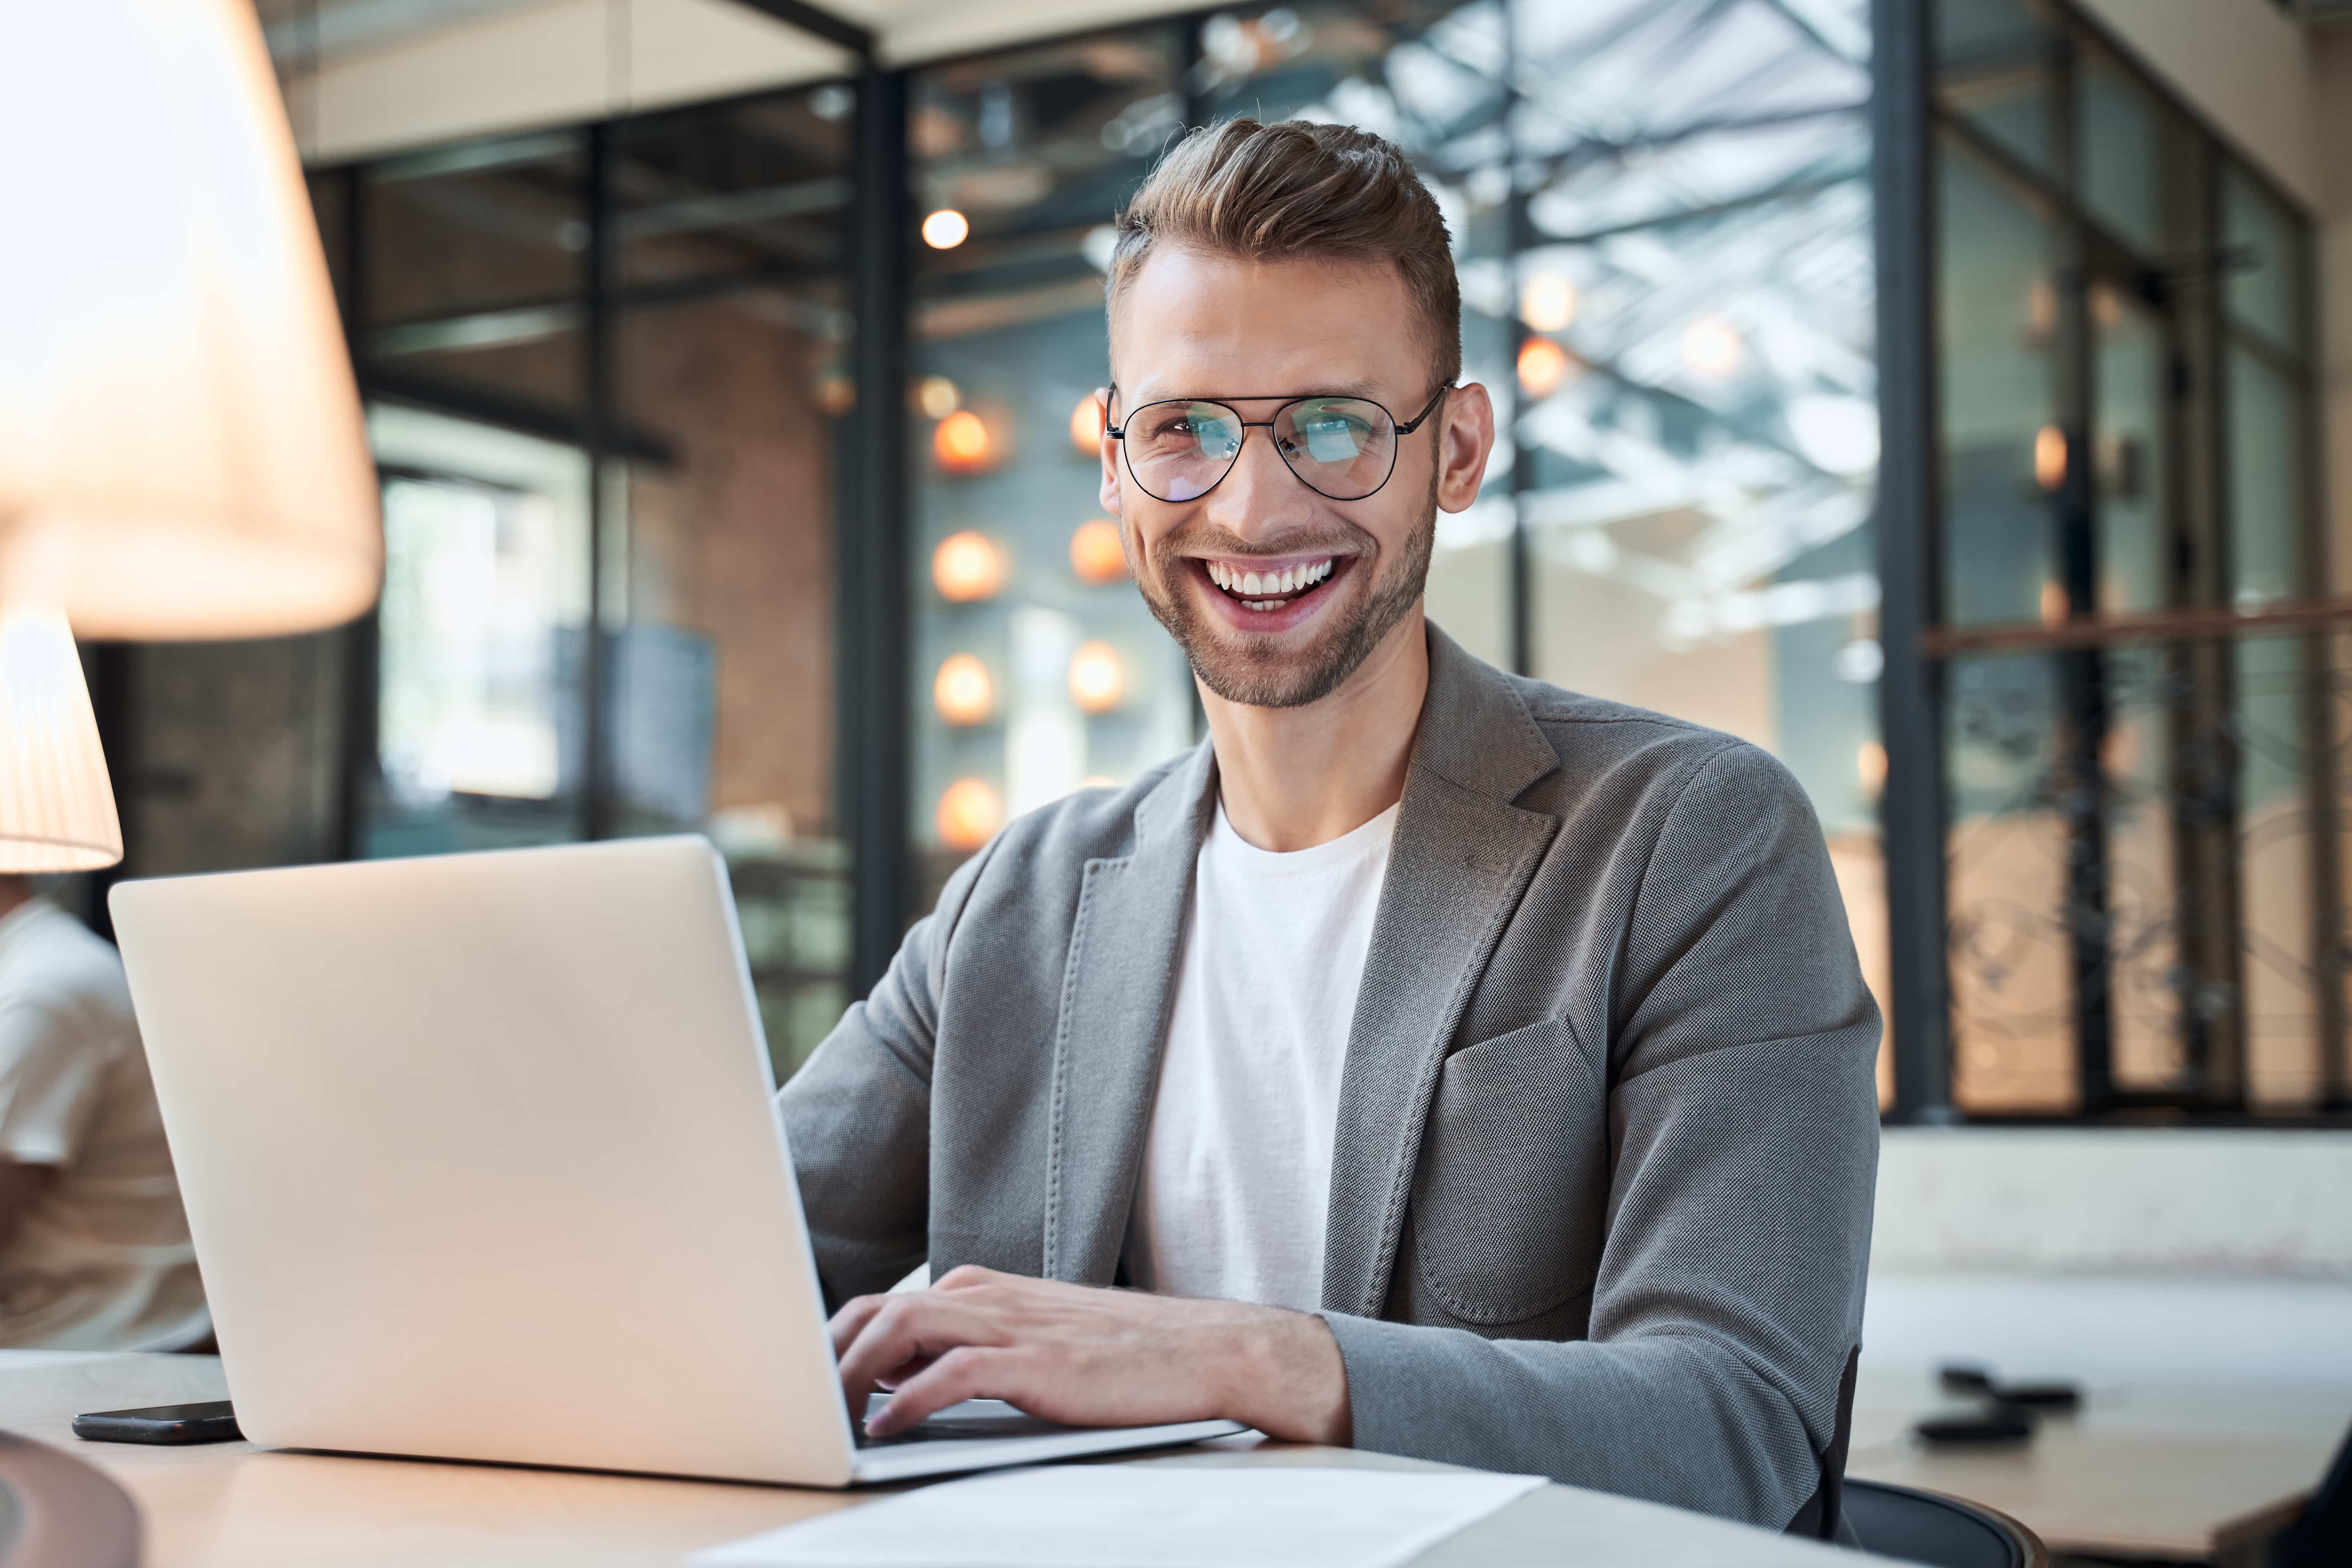 man wearing glasses smiling while working on a computer